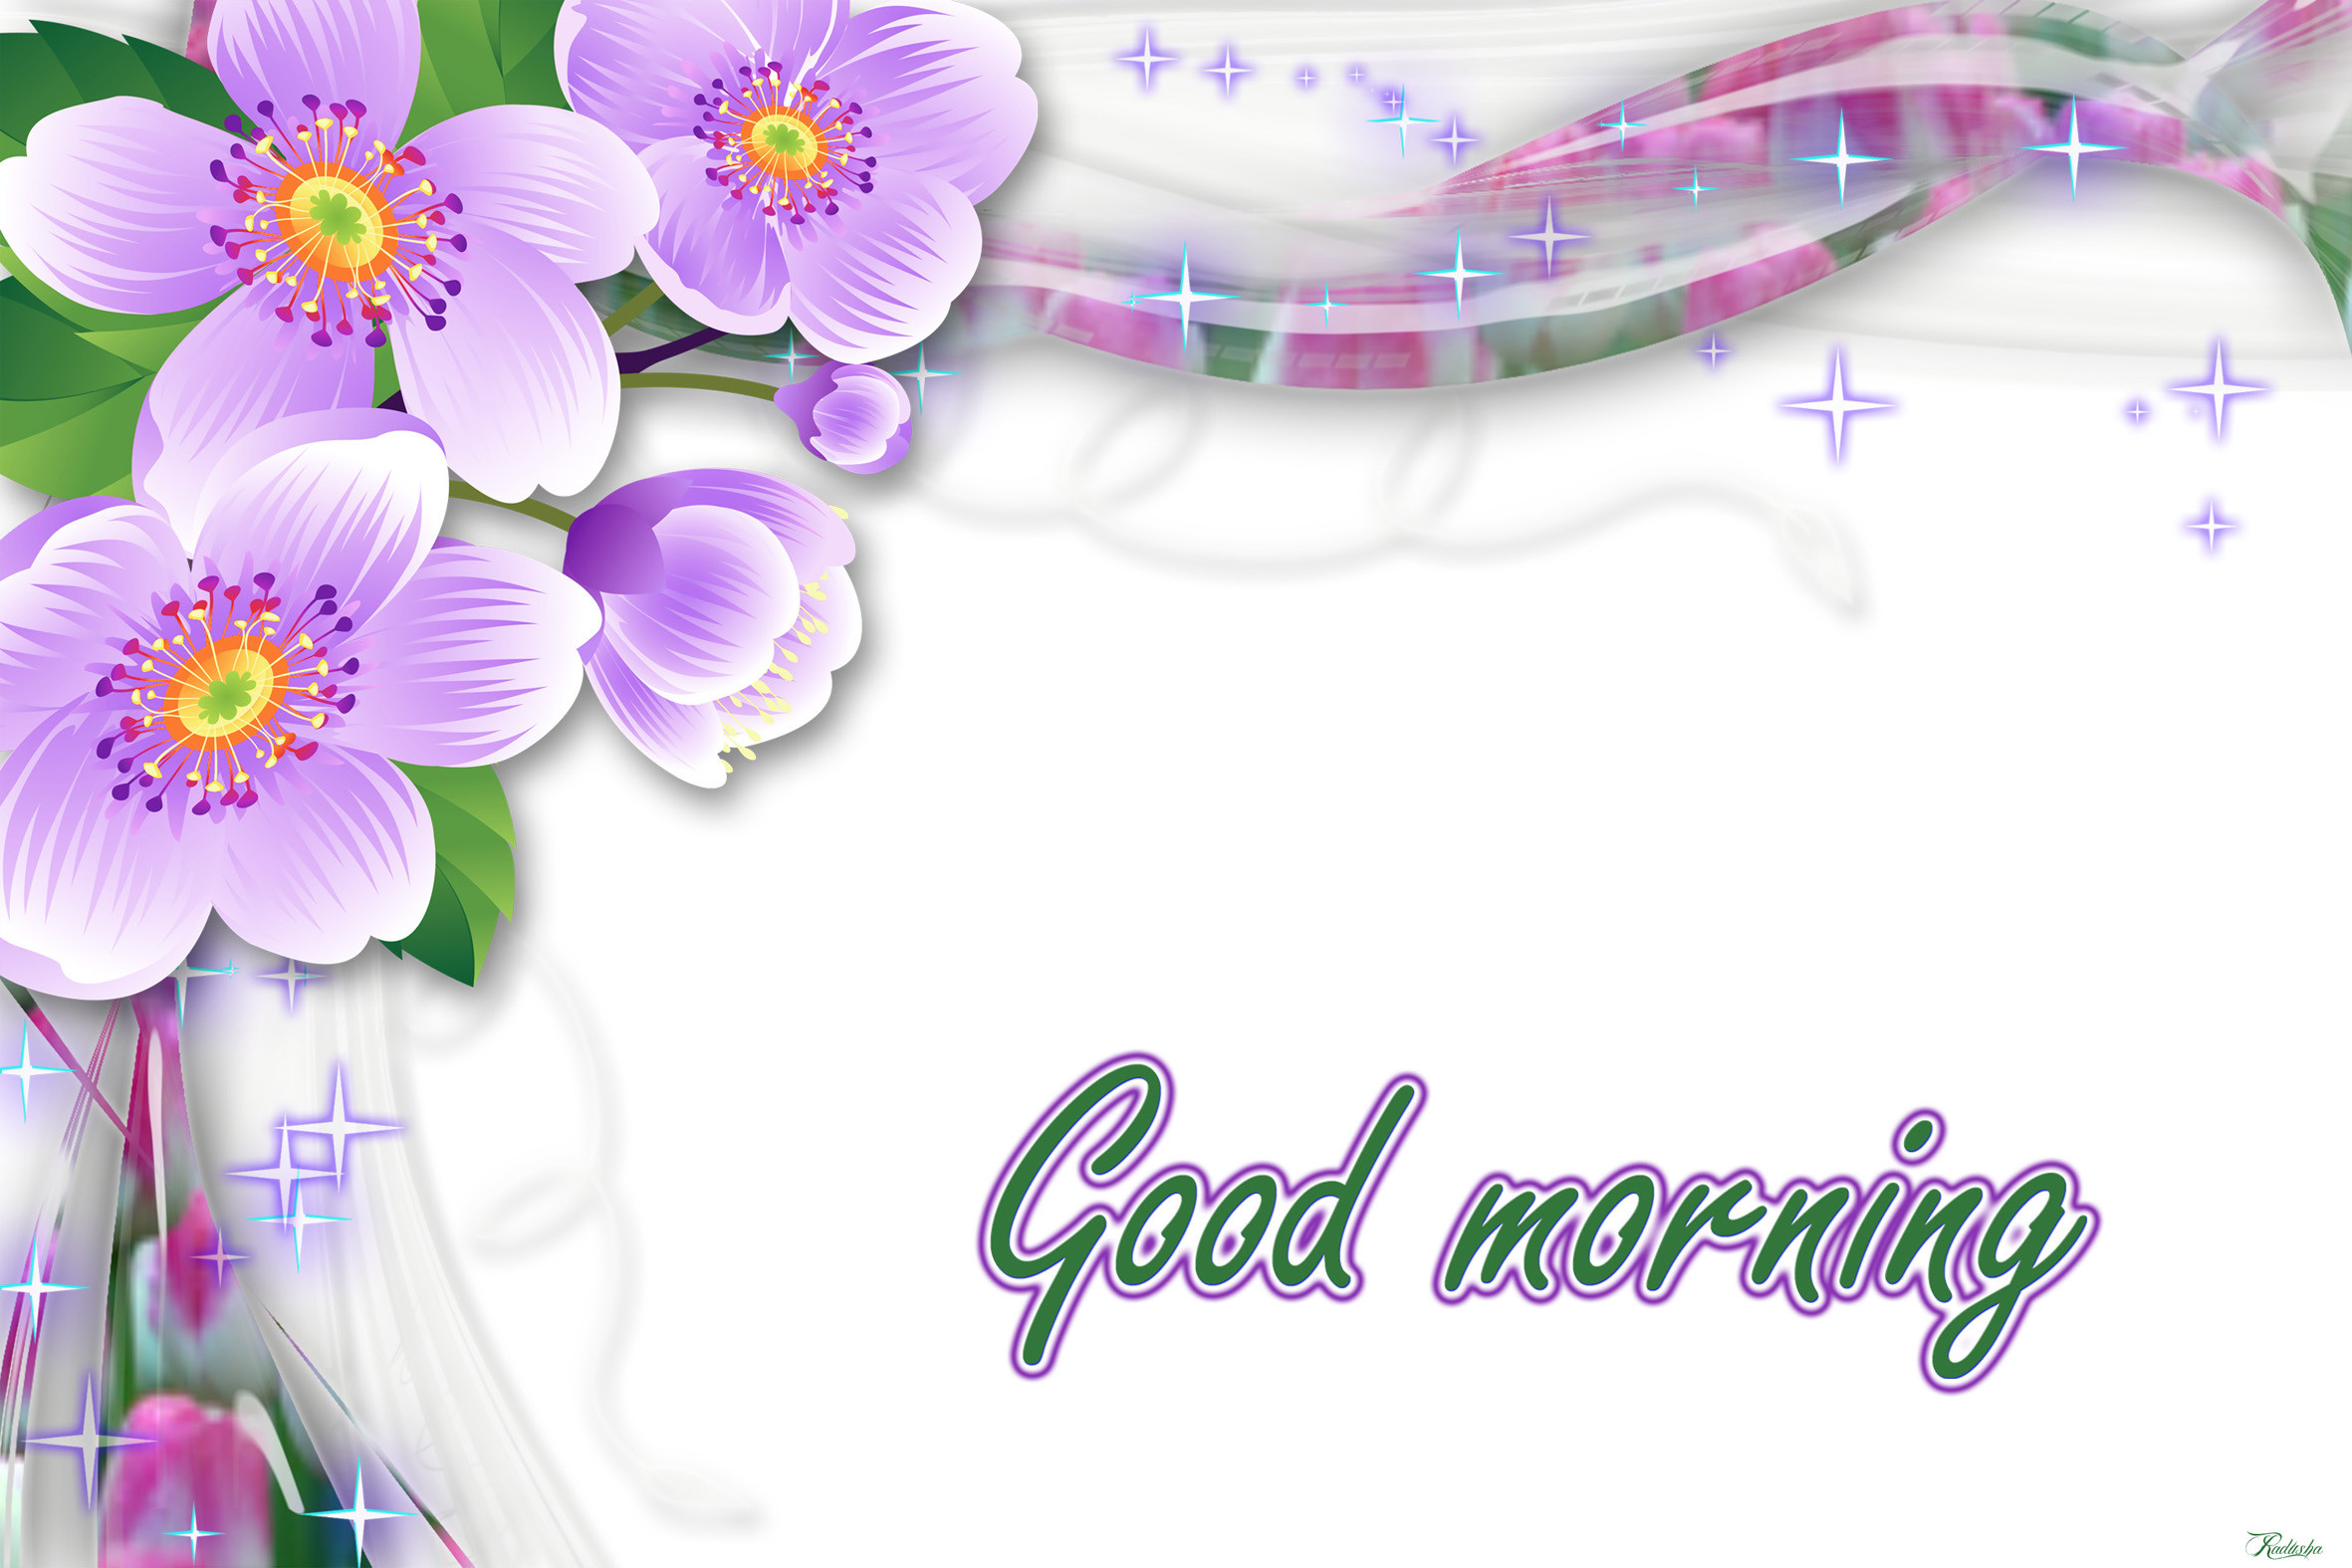 Good Morning Images Free Download - Home